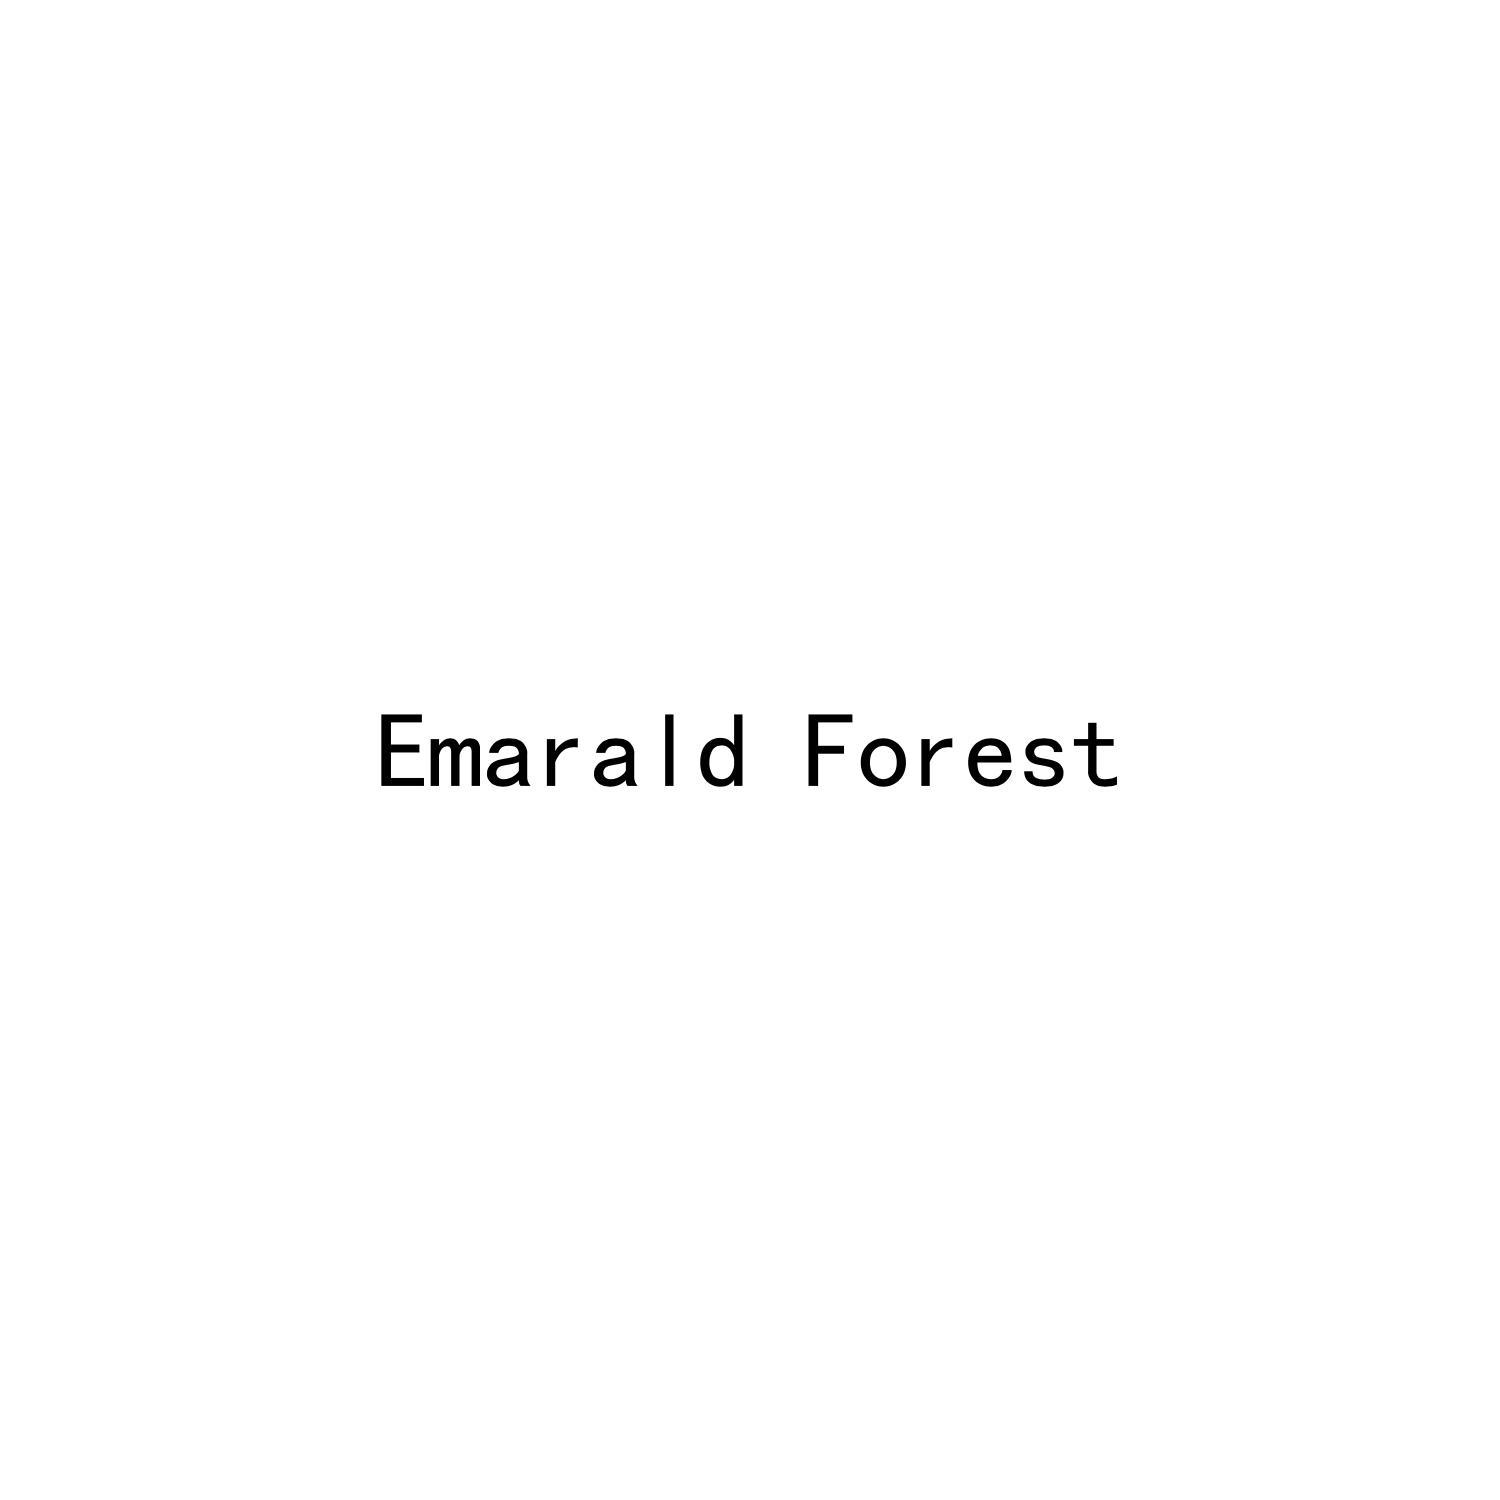 EMARALD FOREST